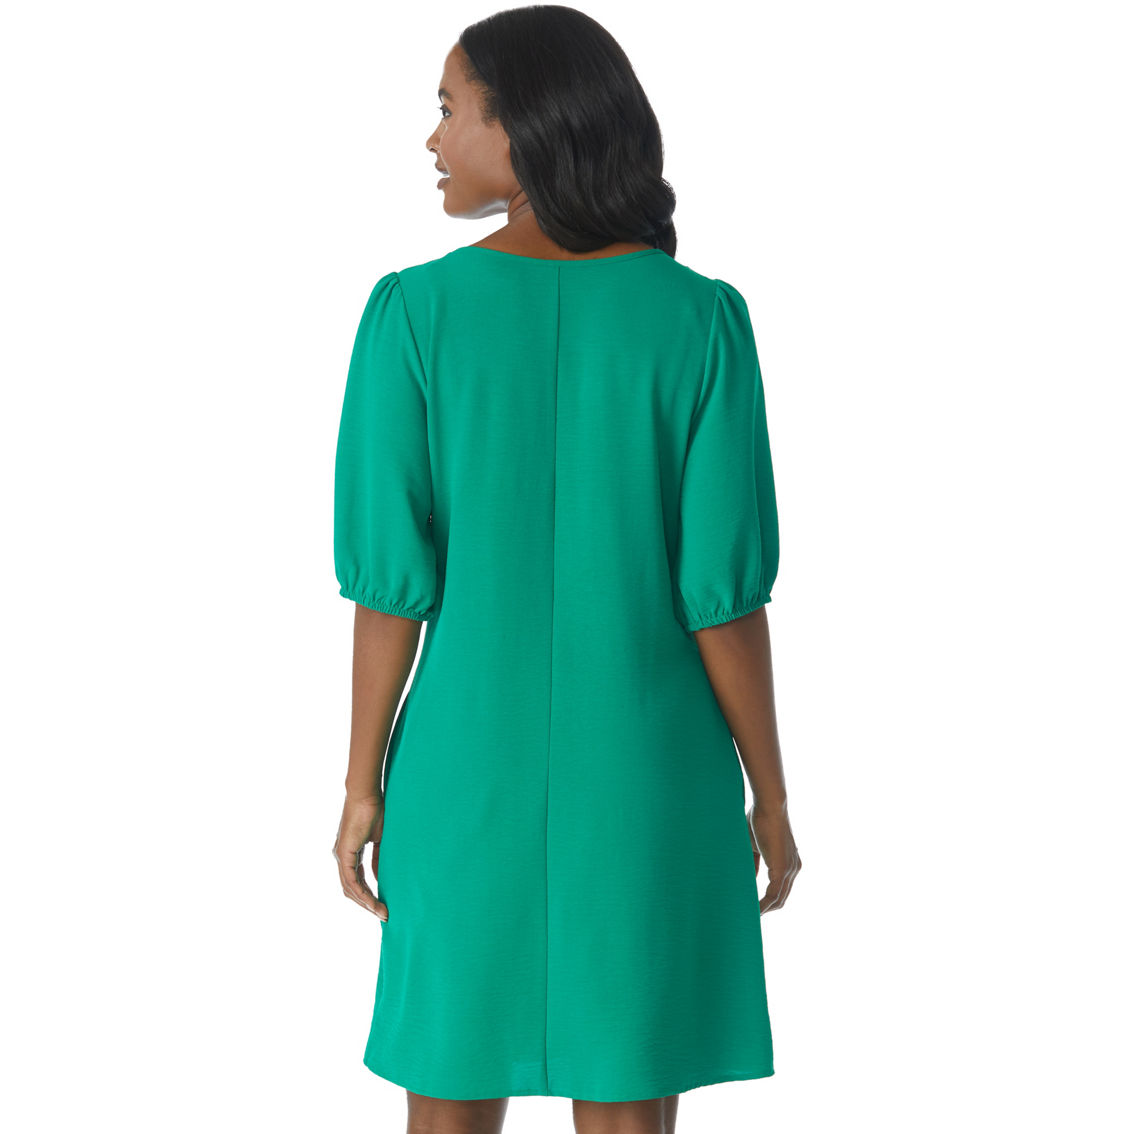 Connected Apparel Quarter Puff Sleeve Round Neck Dress - Image 2 of 4